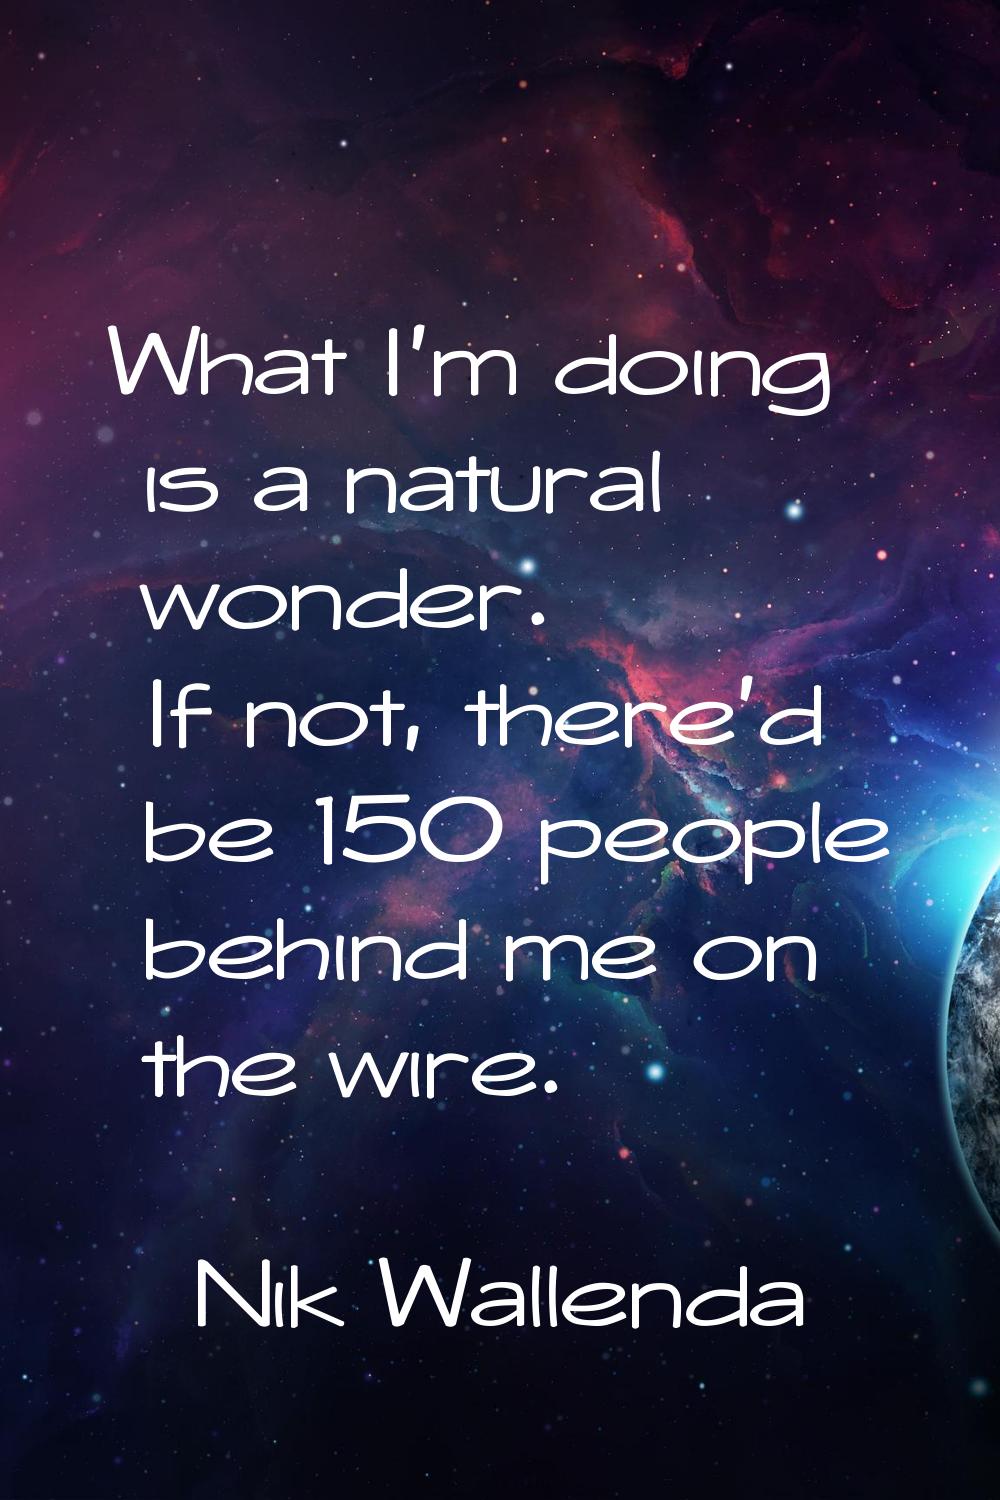 What I'm doing is a natural wonder. If not, there'd be 150 people behind me on the wire.